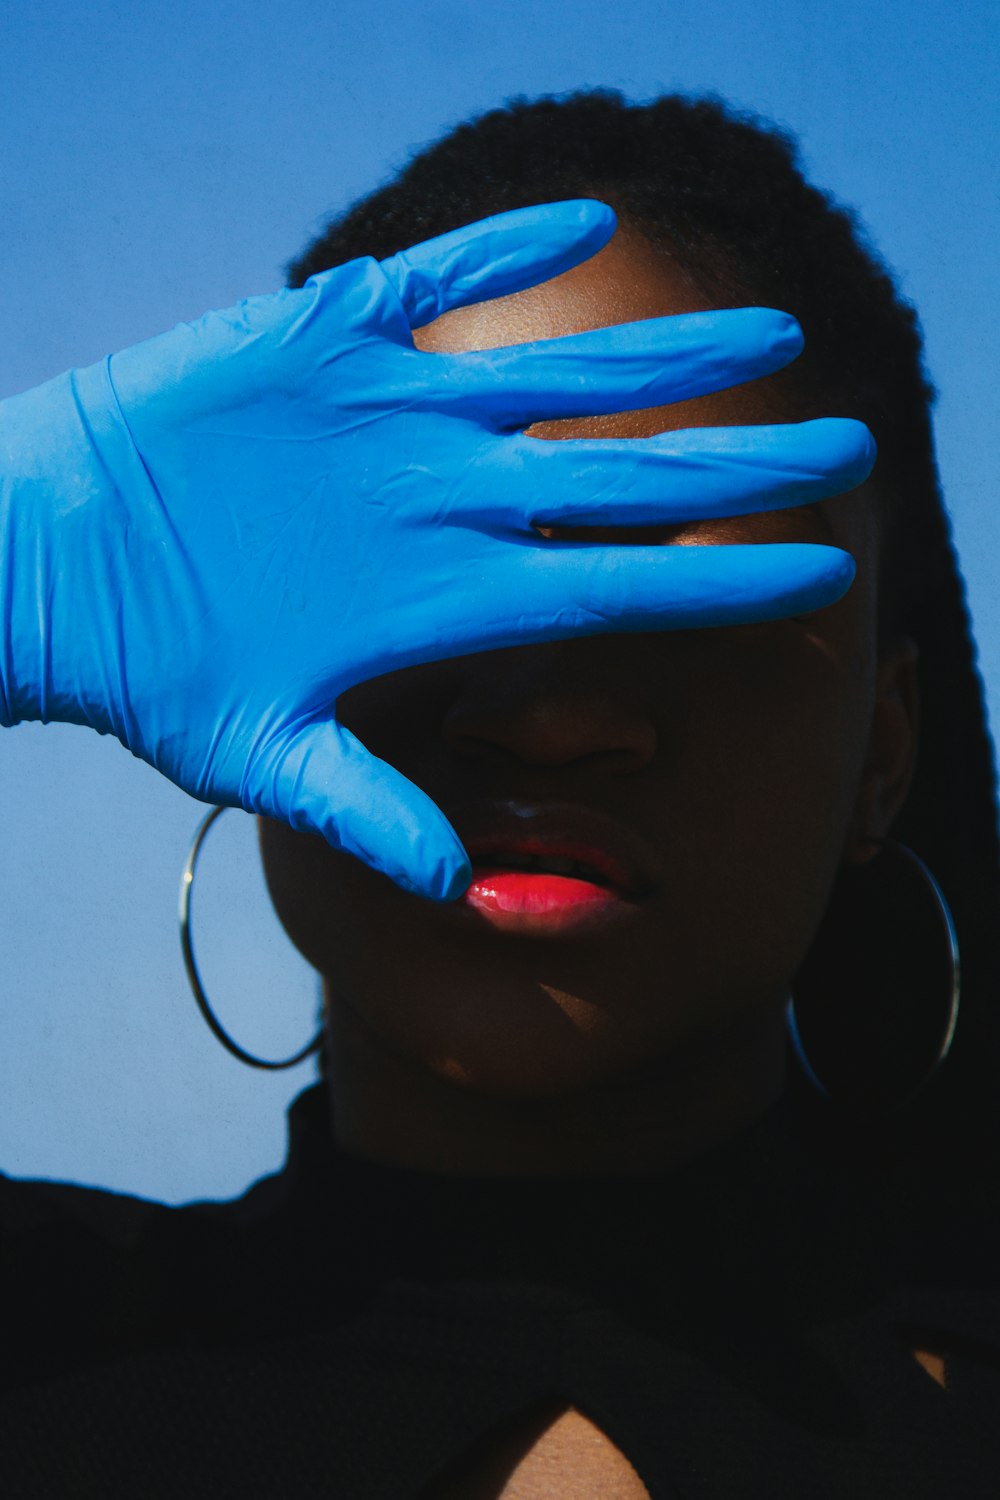 Woman partially hiding her face wearing a blue medical latex glove